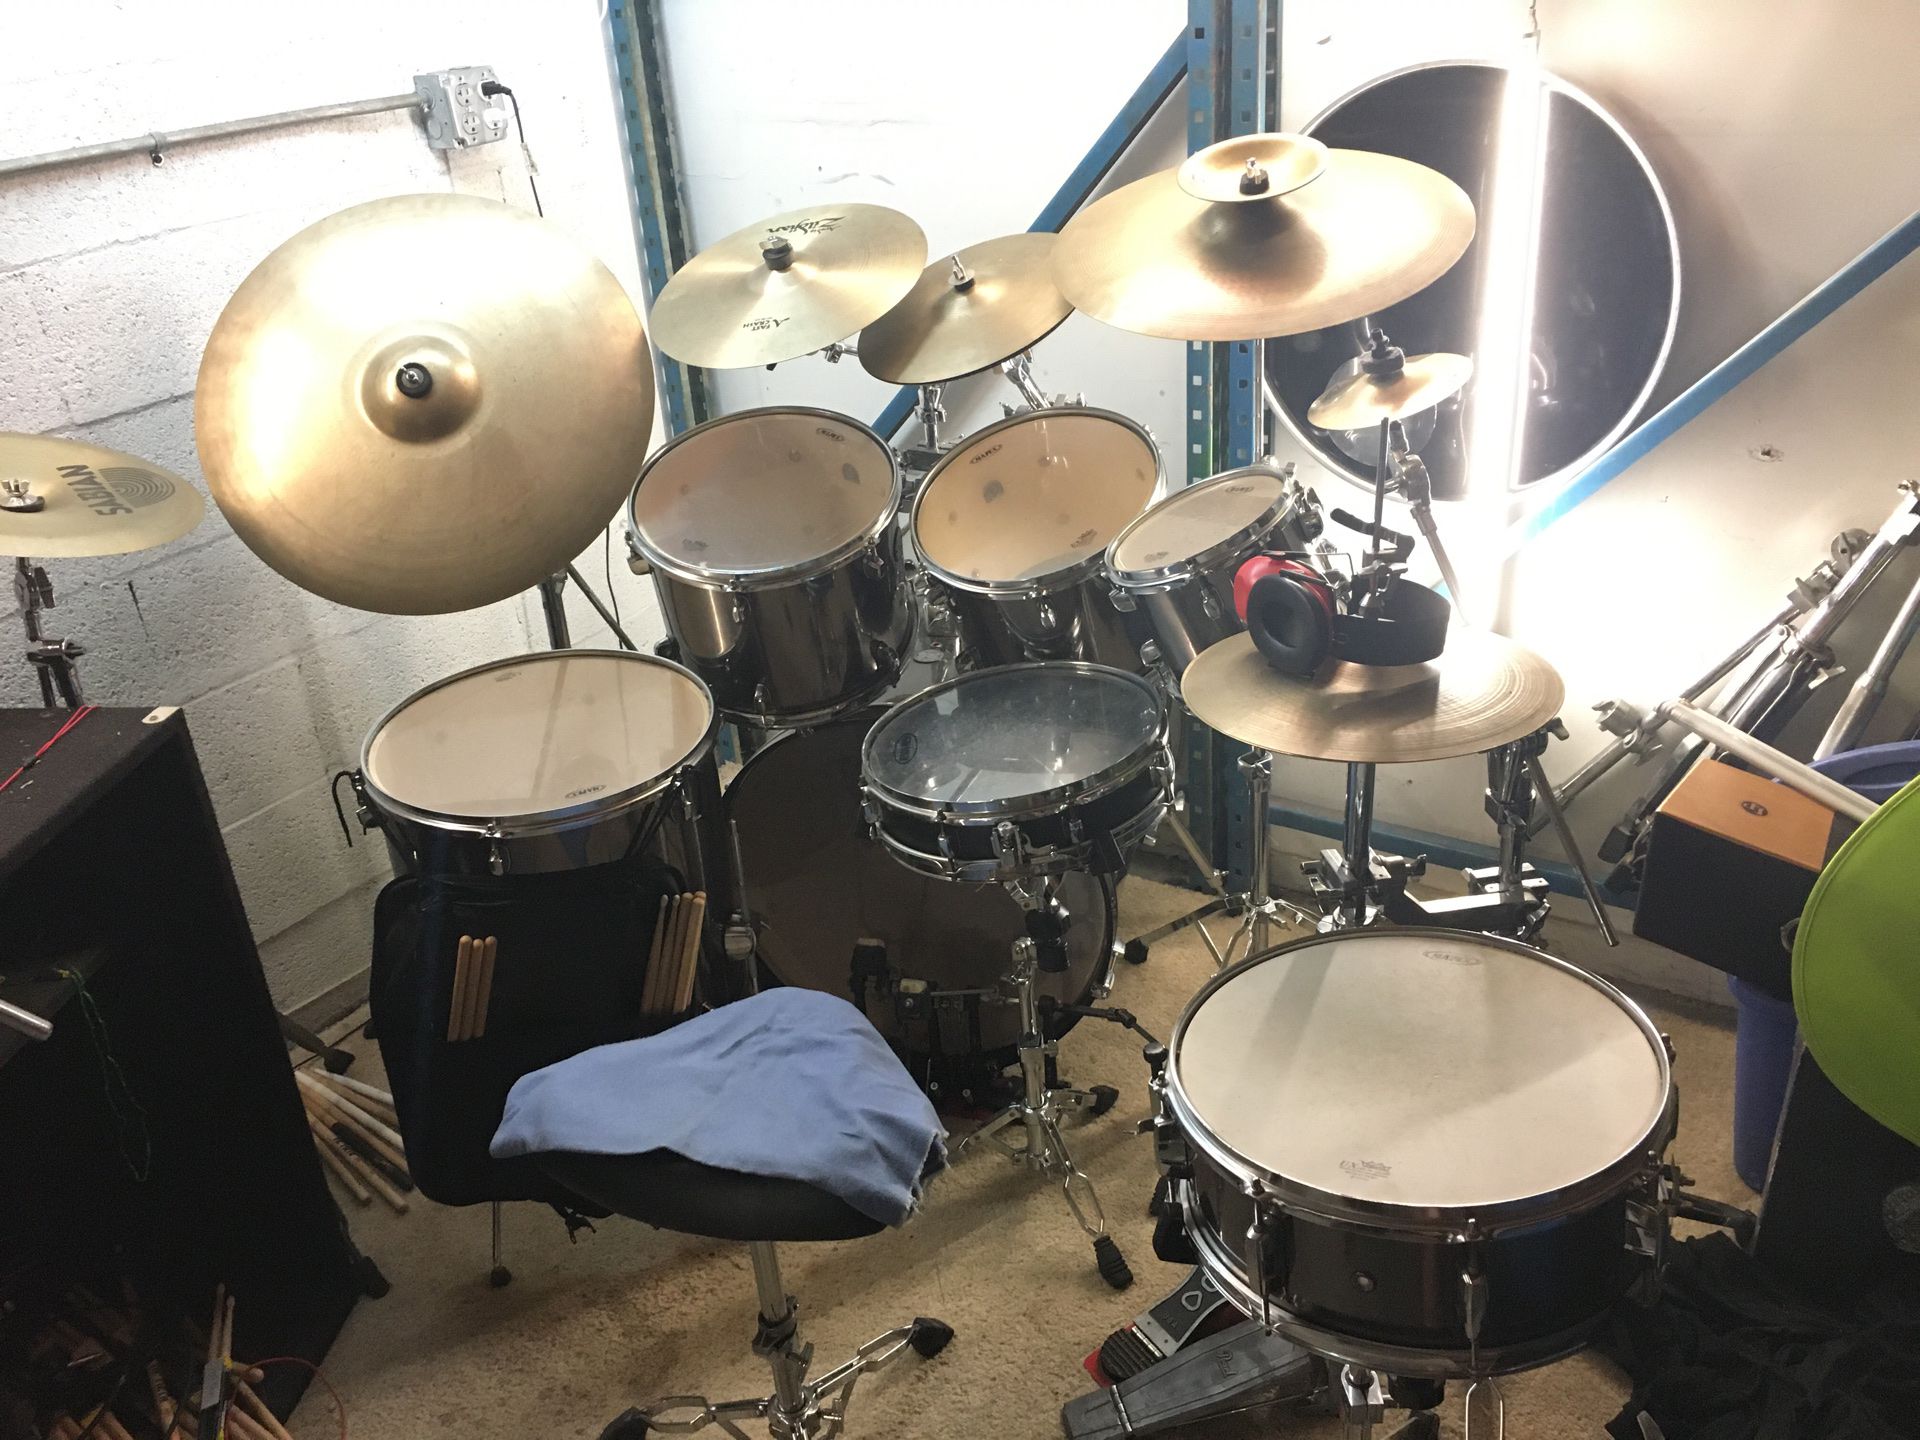 Mapex drum set from 2014